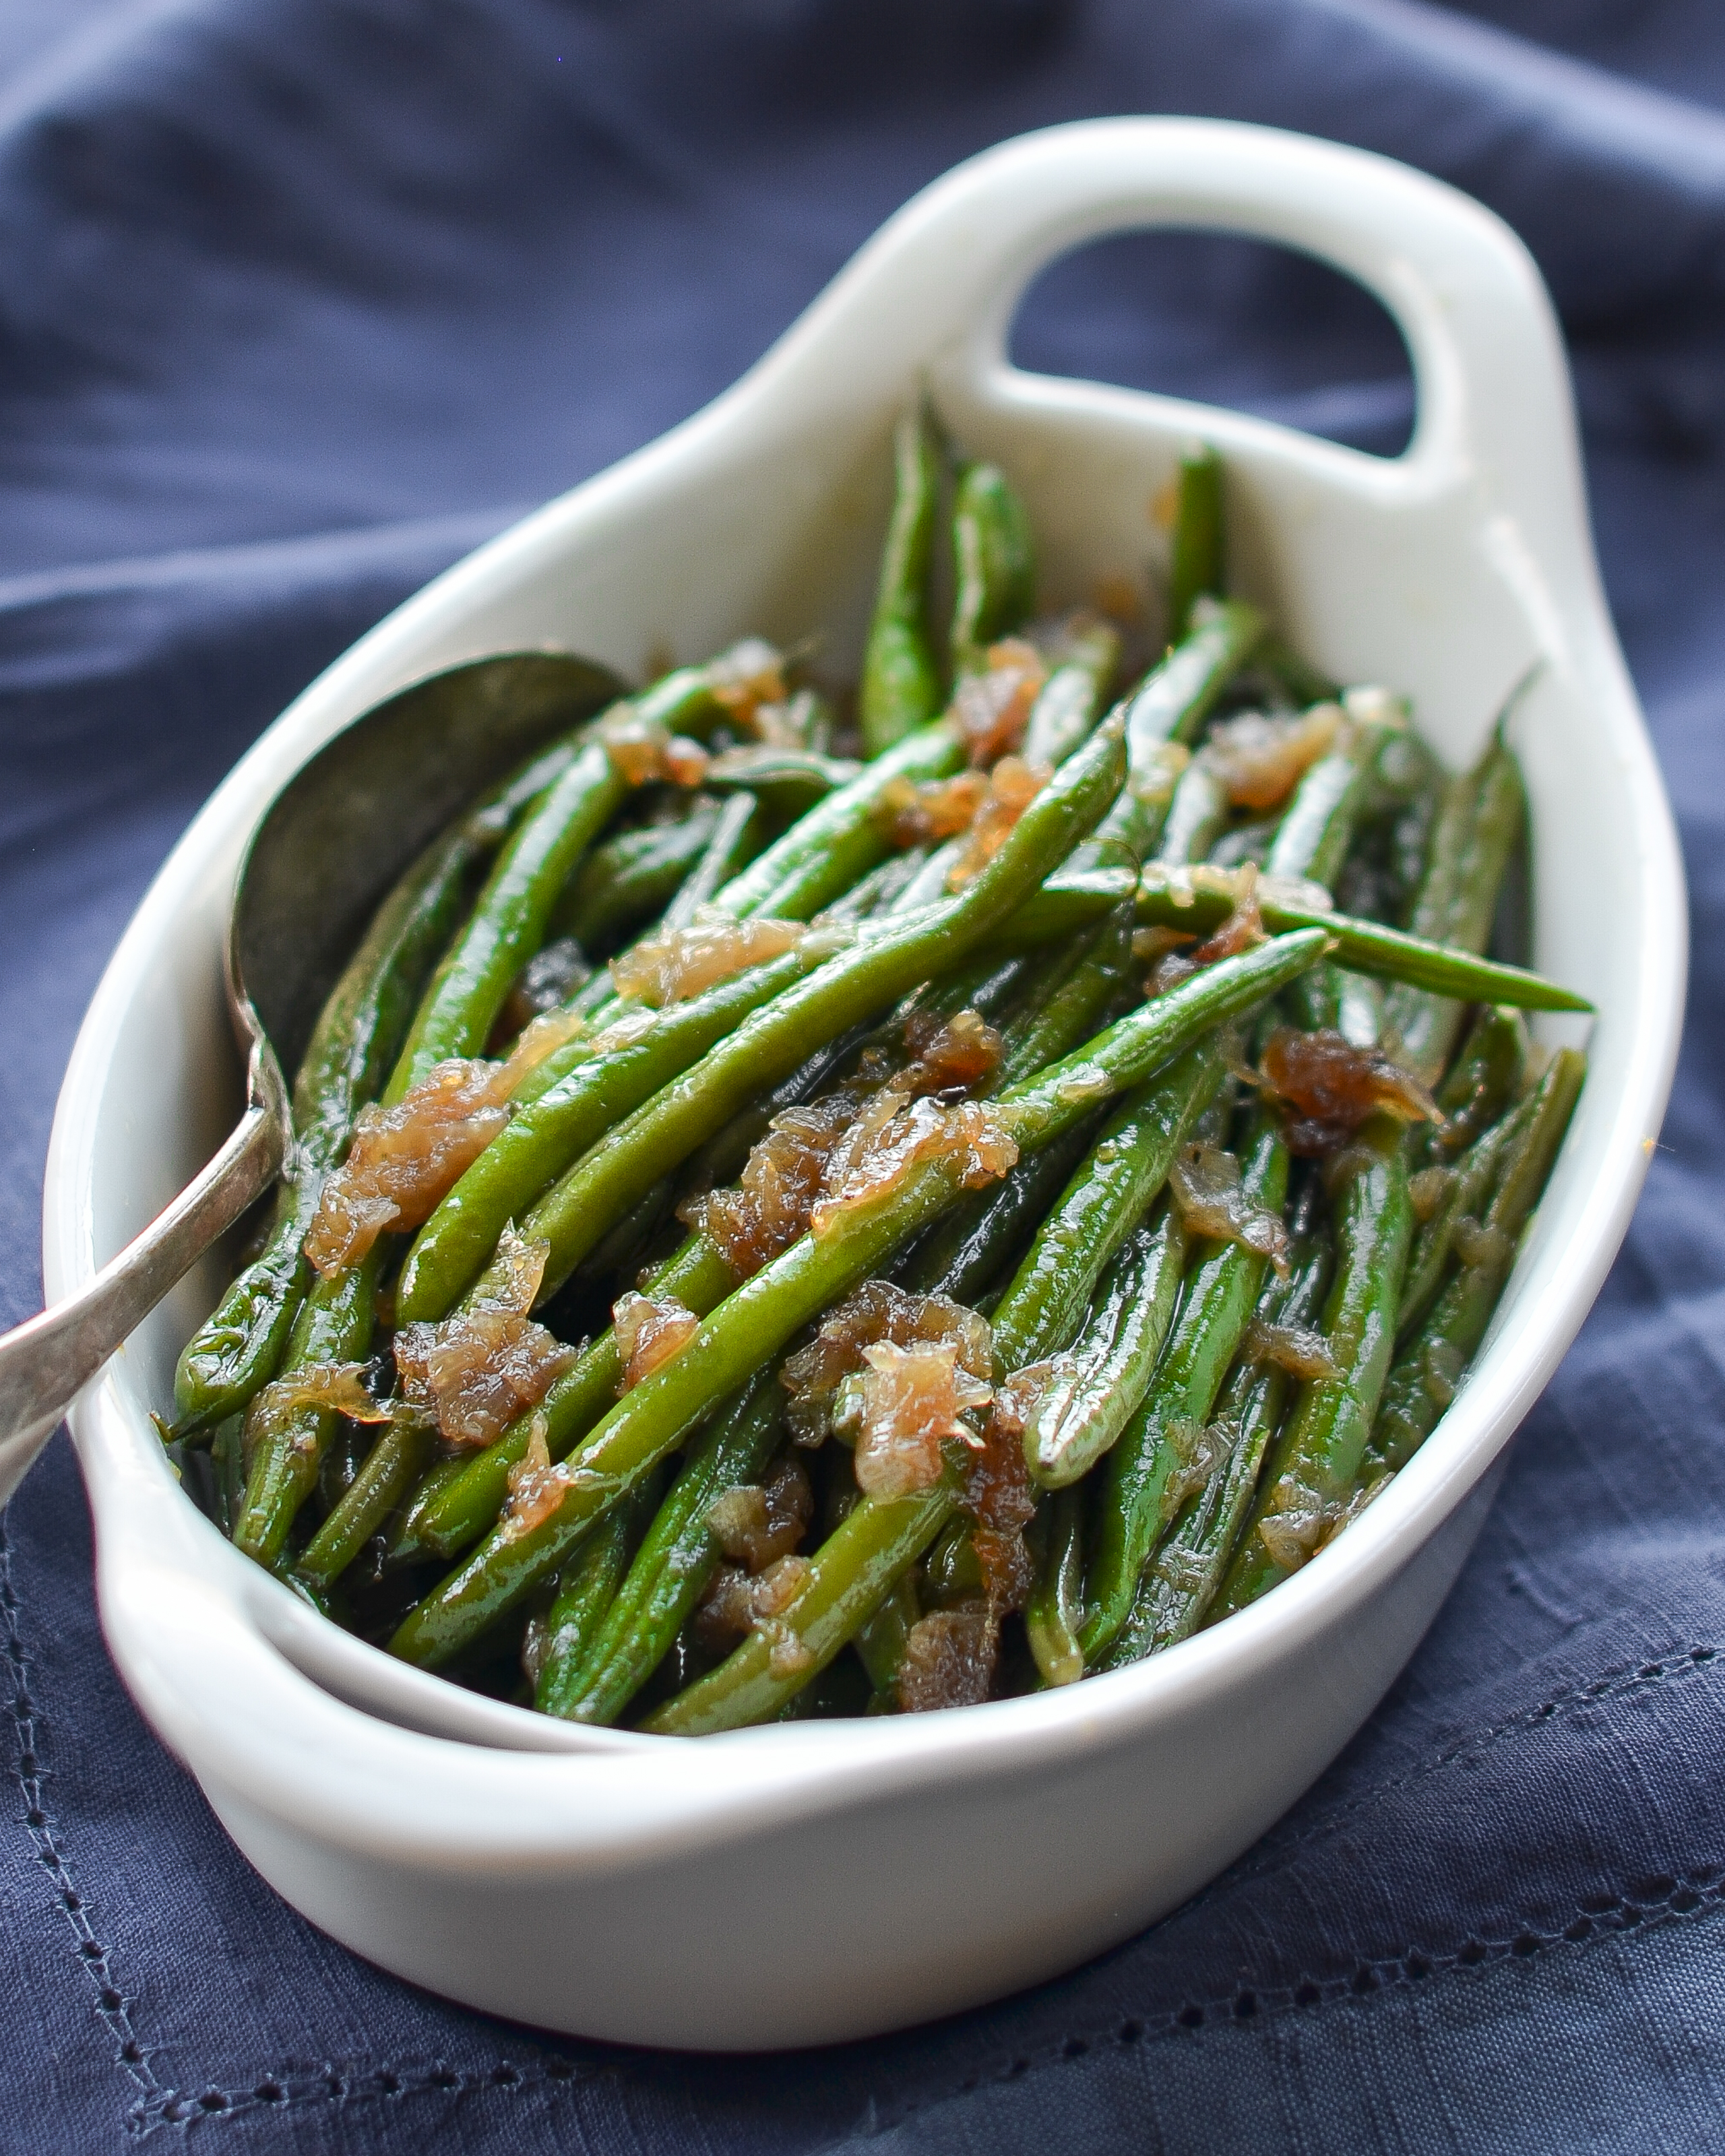 https://www.onceuponachef.com/images/2014/01/French-Beans-with-Shallots.jpg